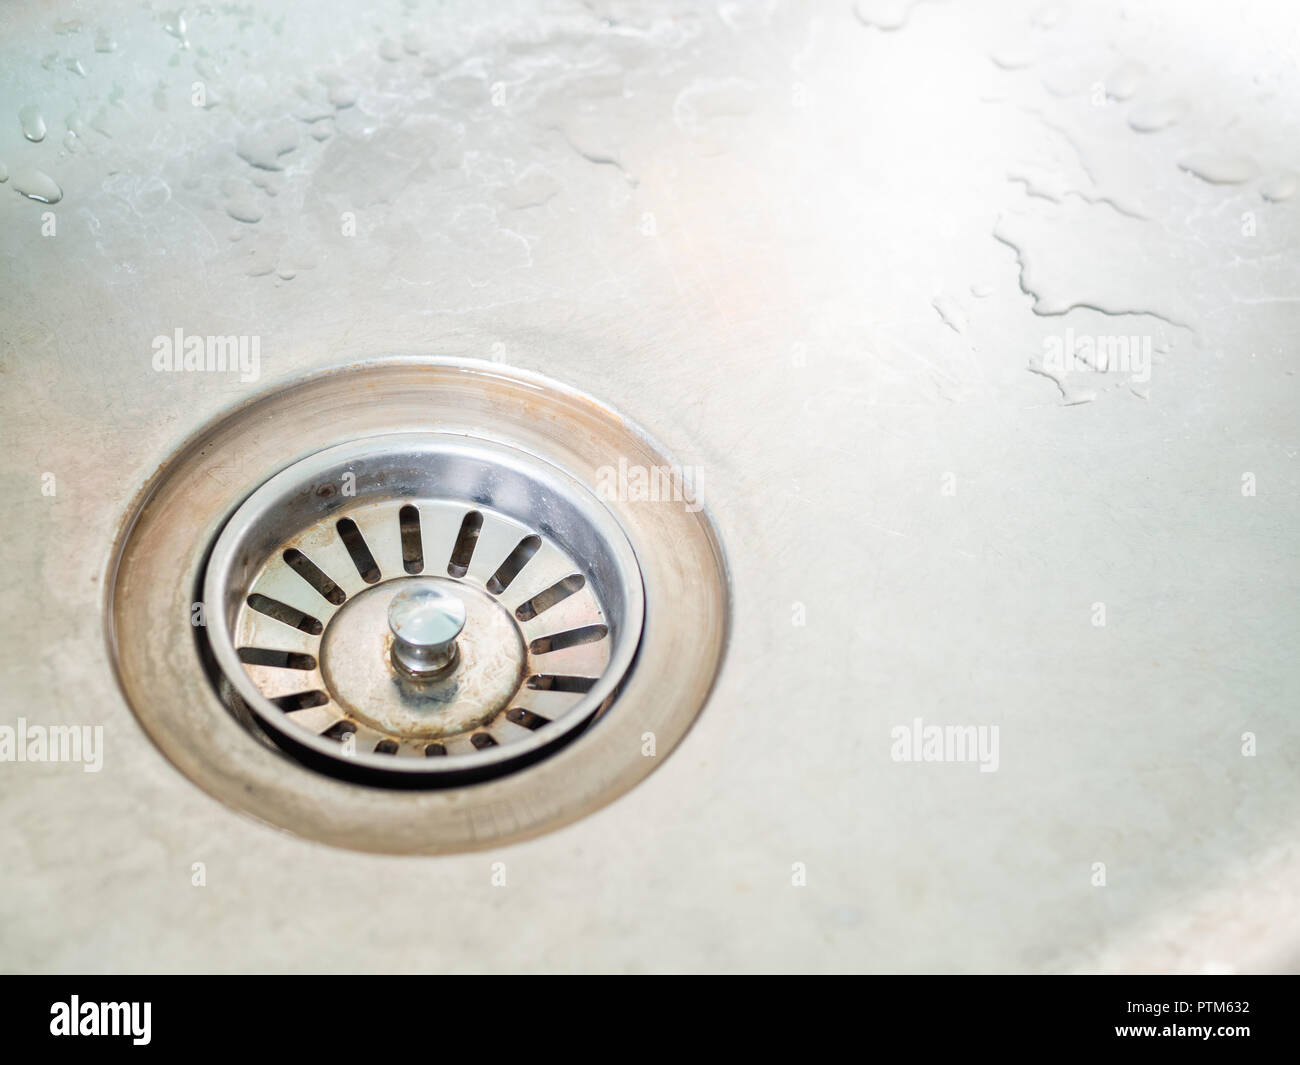 Dirty Stainless Steel Kitchen Sink Drain With Water Stain